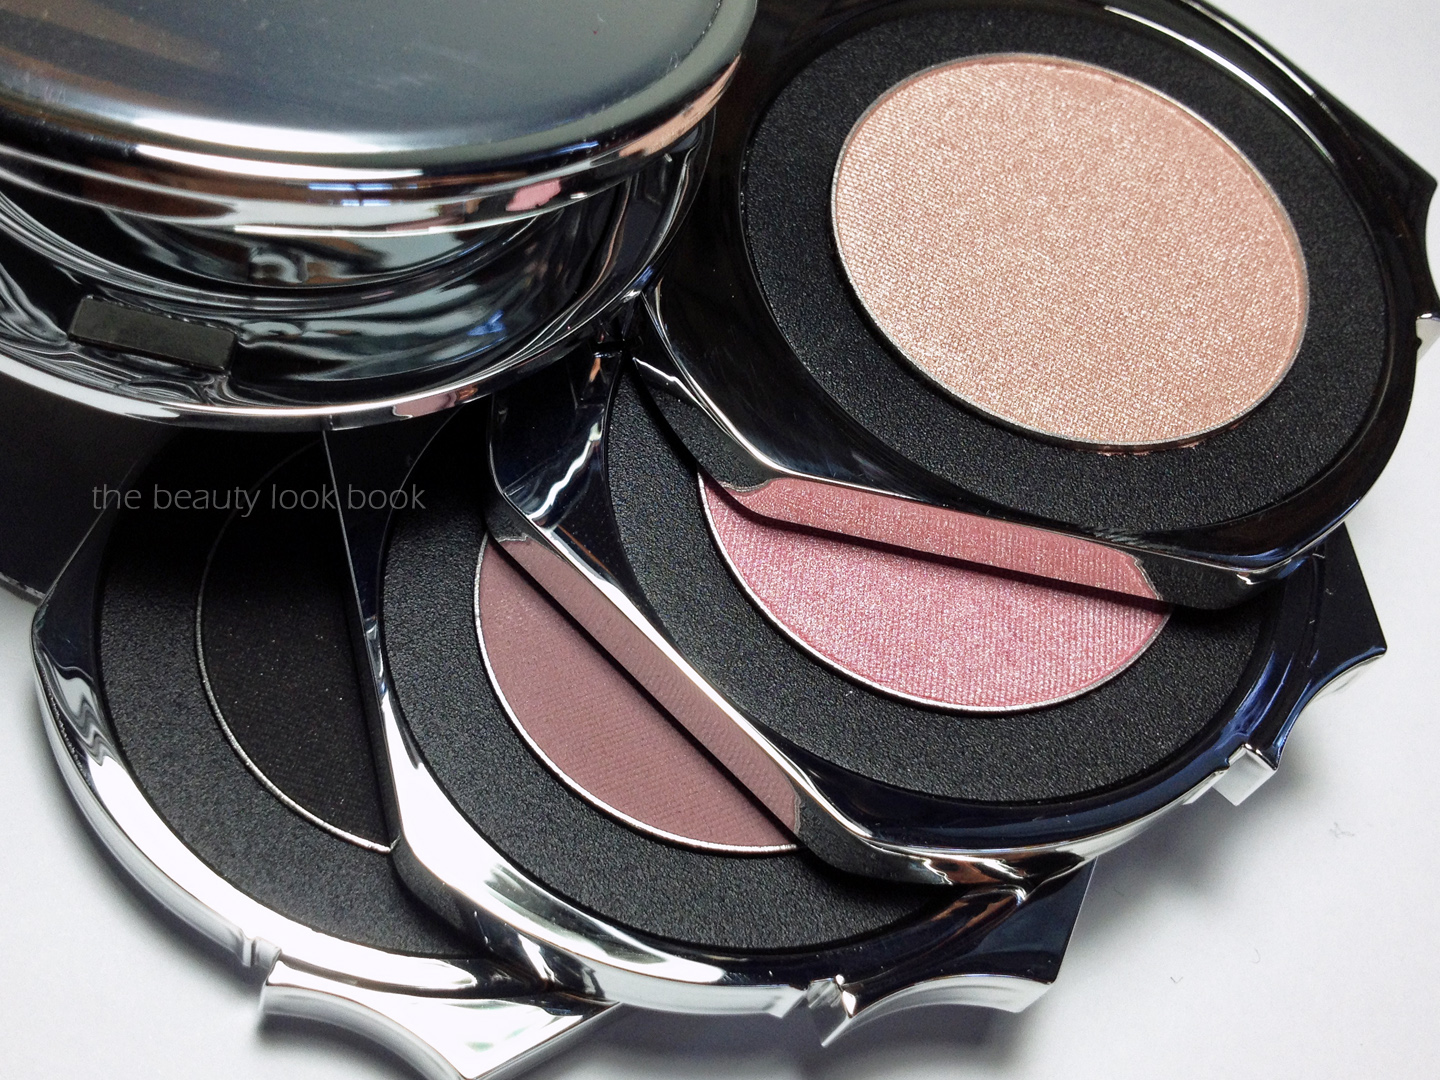 Chanel Premieres Fleurs Harmony Of Powders & Rouge Coco Glossimer